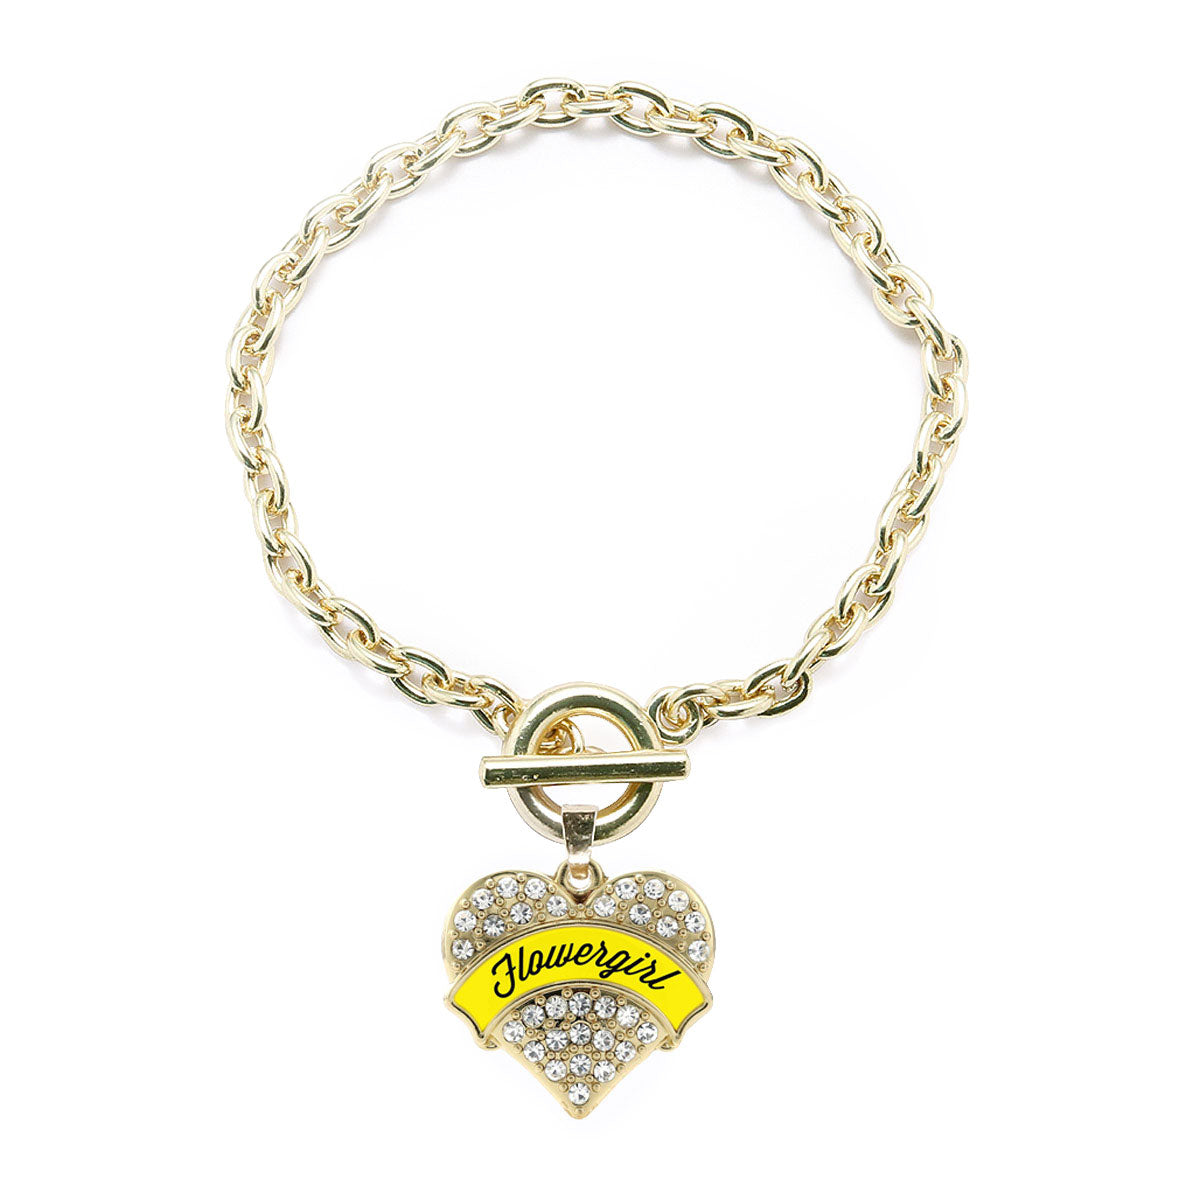 Gold Yellow Flower Girl Pave Heart Charm Toggle Bracelet